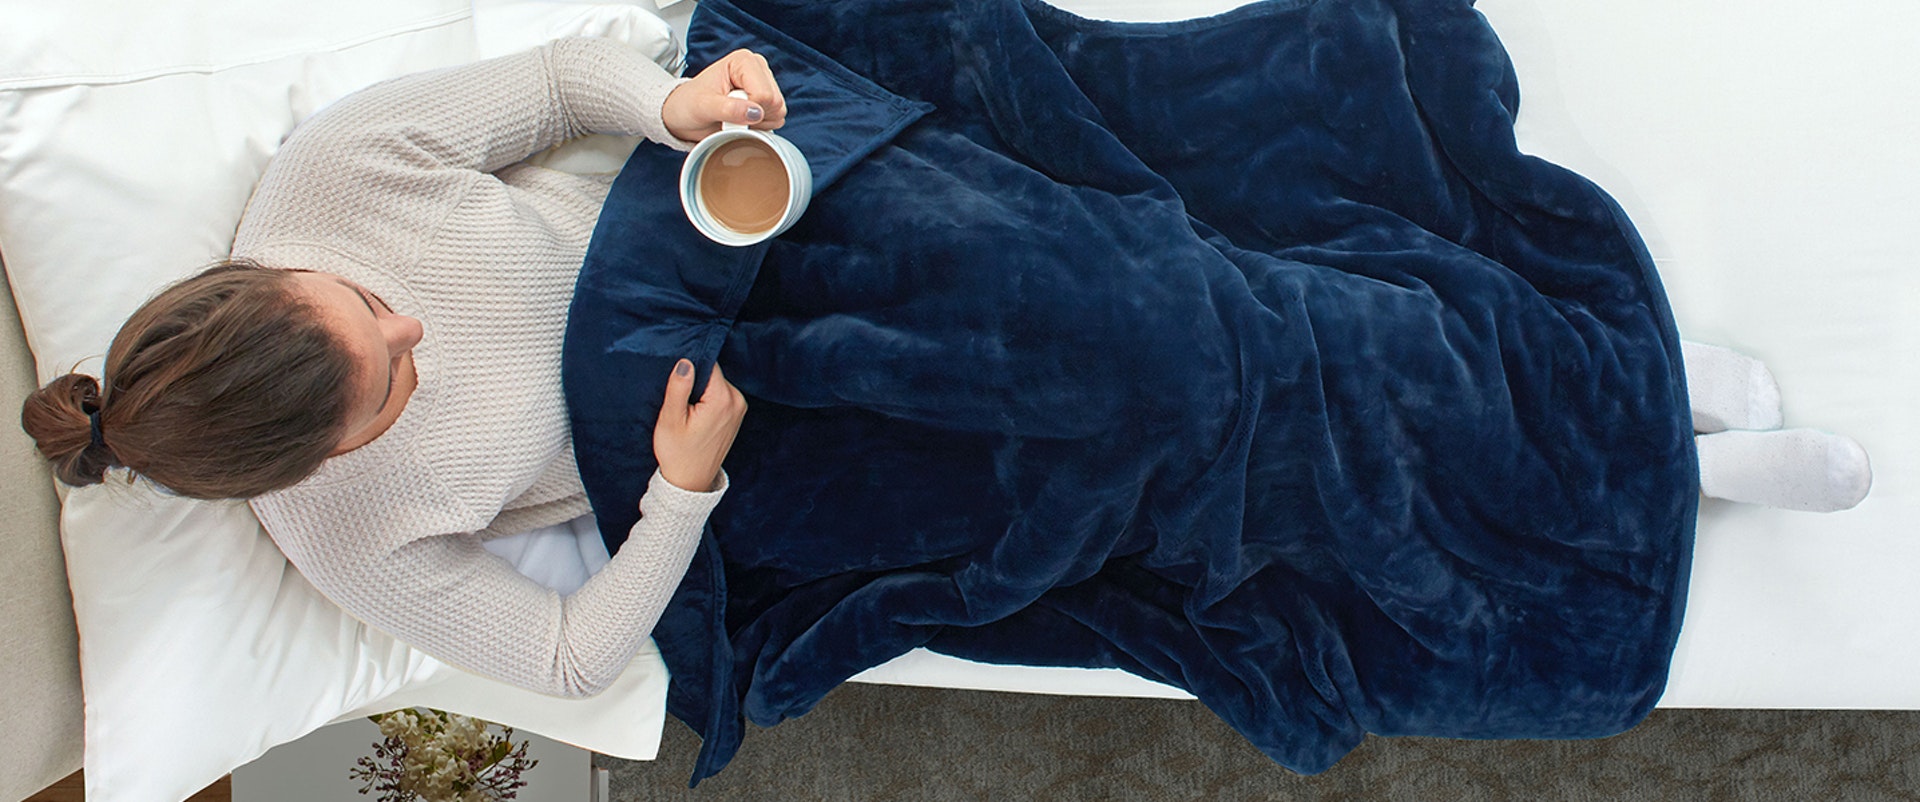 Therapedic Weighted Blanket - Our Honest Review | 2020